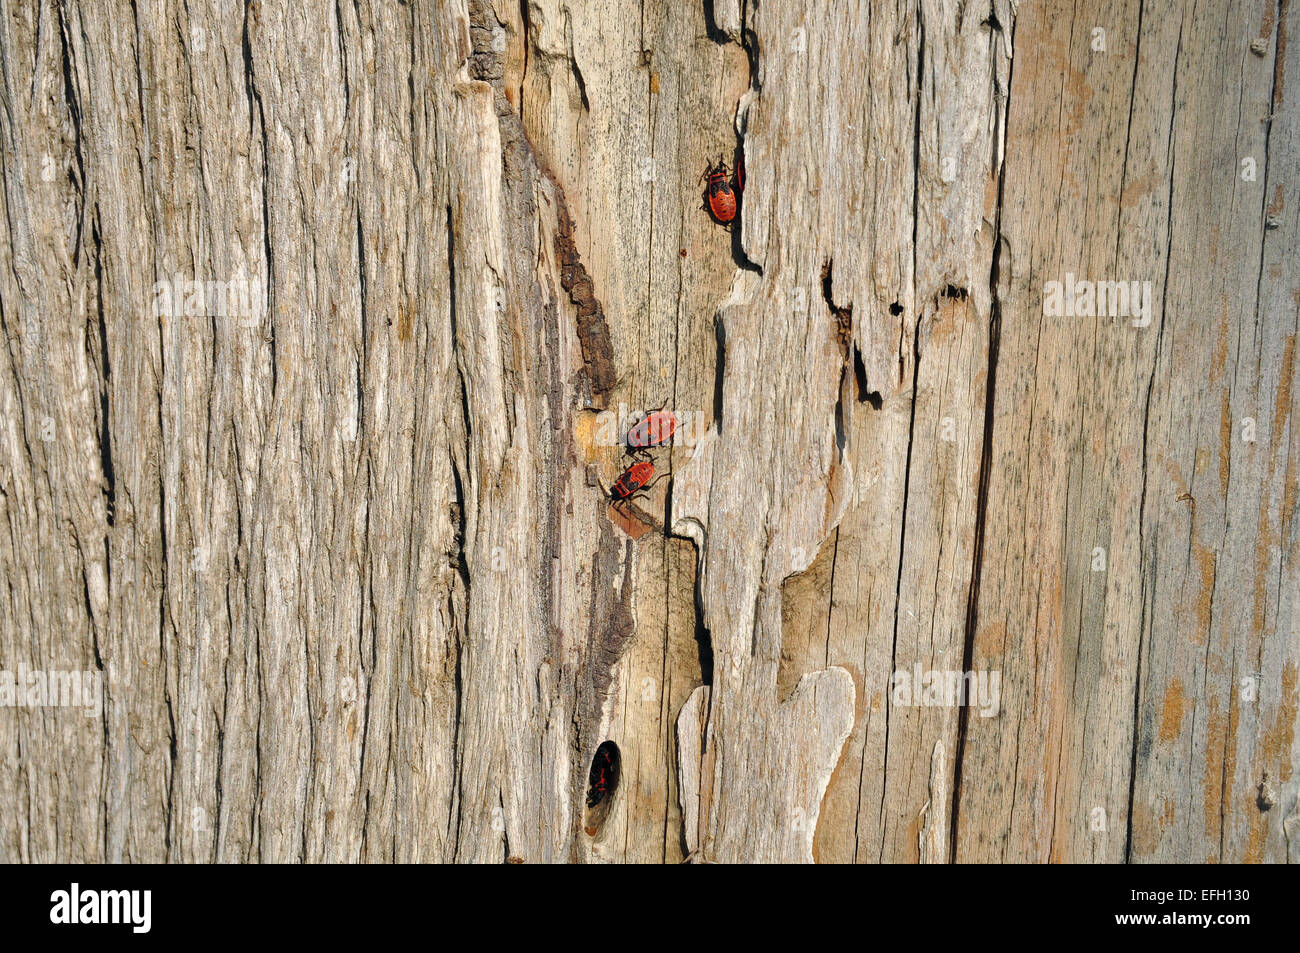 Firebug insects sheltering in tree trunk bark cleft. Wood background texture and red bugs. Stock Photo